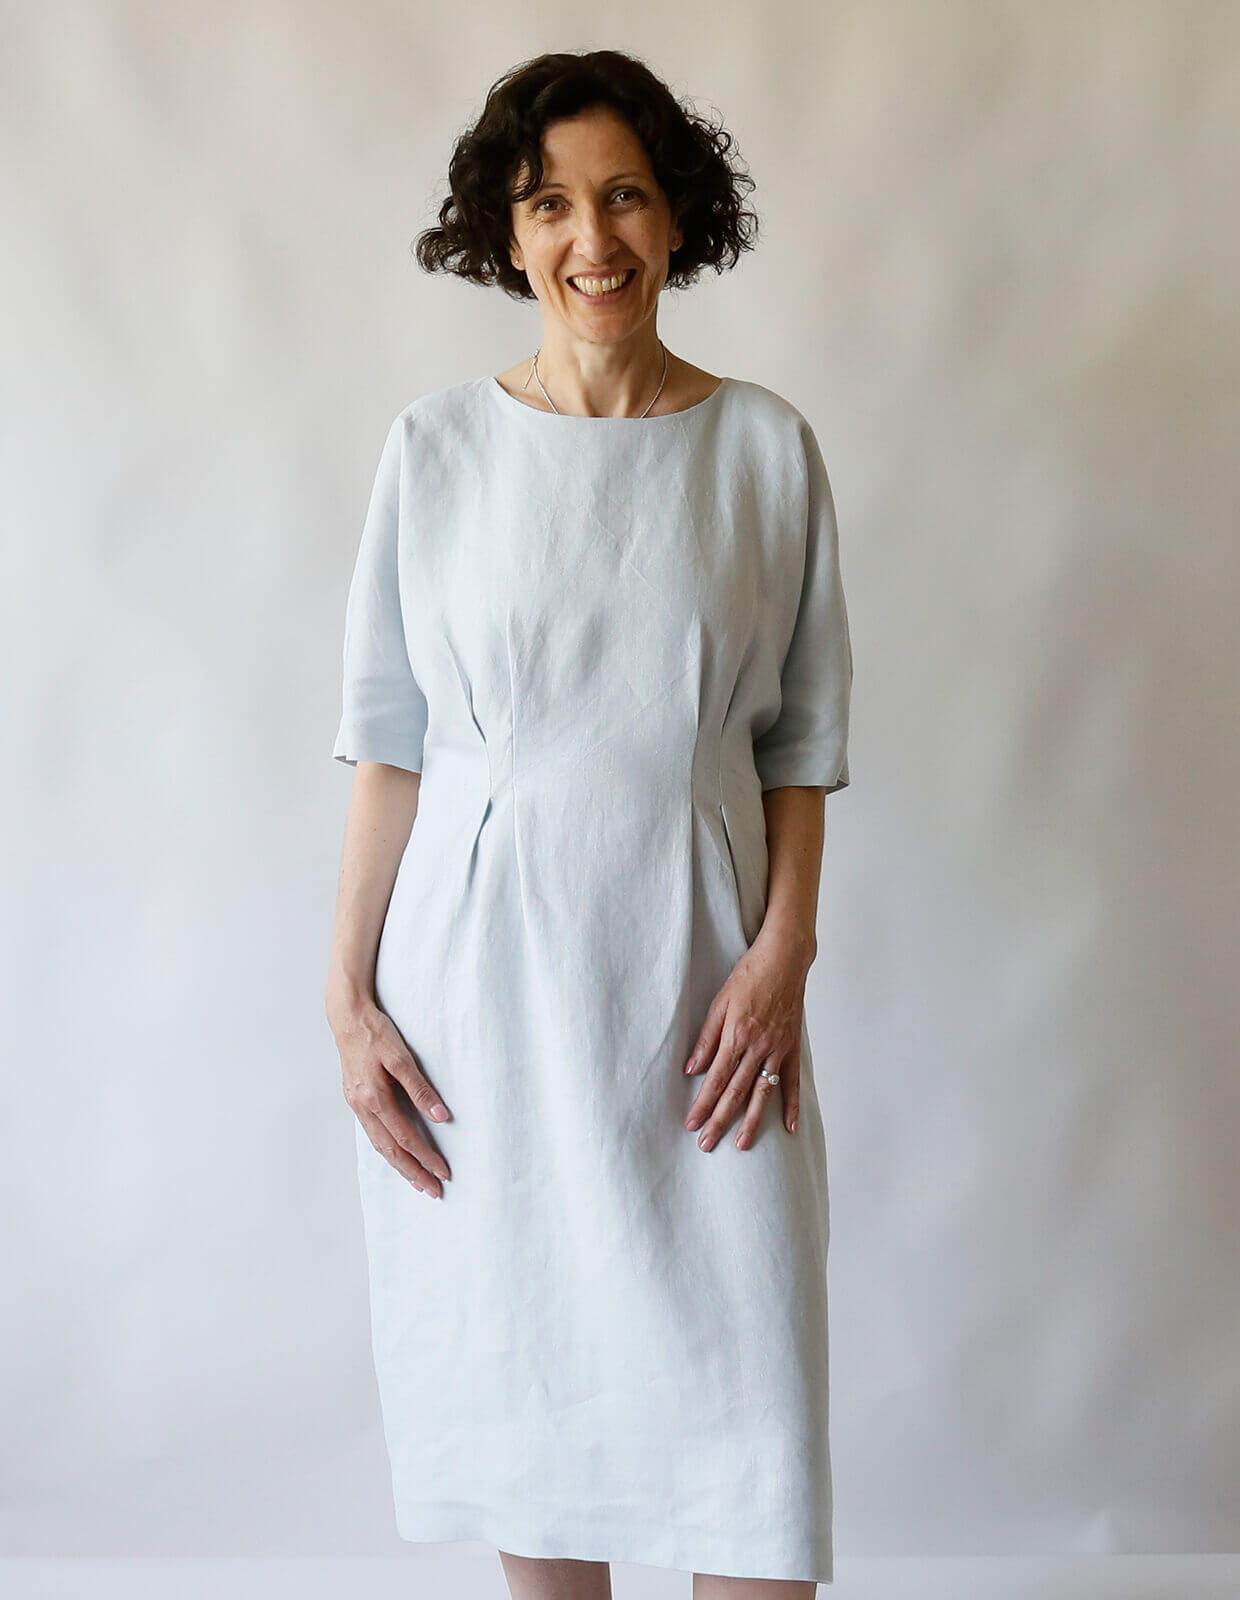 Woman wearing the Day Dress sewing pattern from The Maker’s Atelier on The Fold Line. A dress pattern made in cotton, linen, denim, chambray, Tencel and viscose fabrics, featuring a relaxed fit, pull-on style, grown on elbow length sleeves, round neck, fr